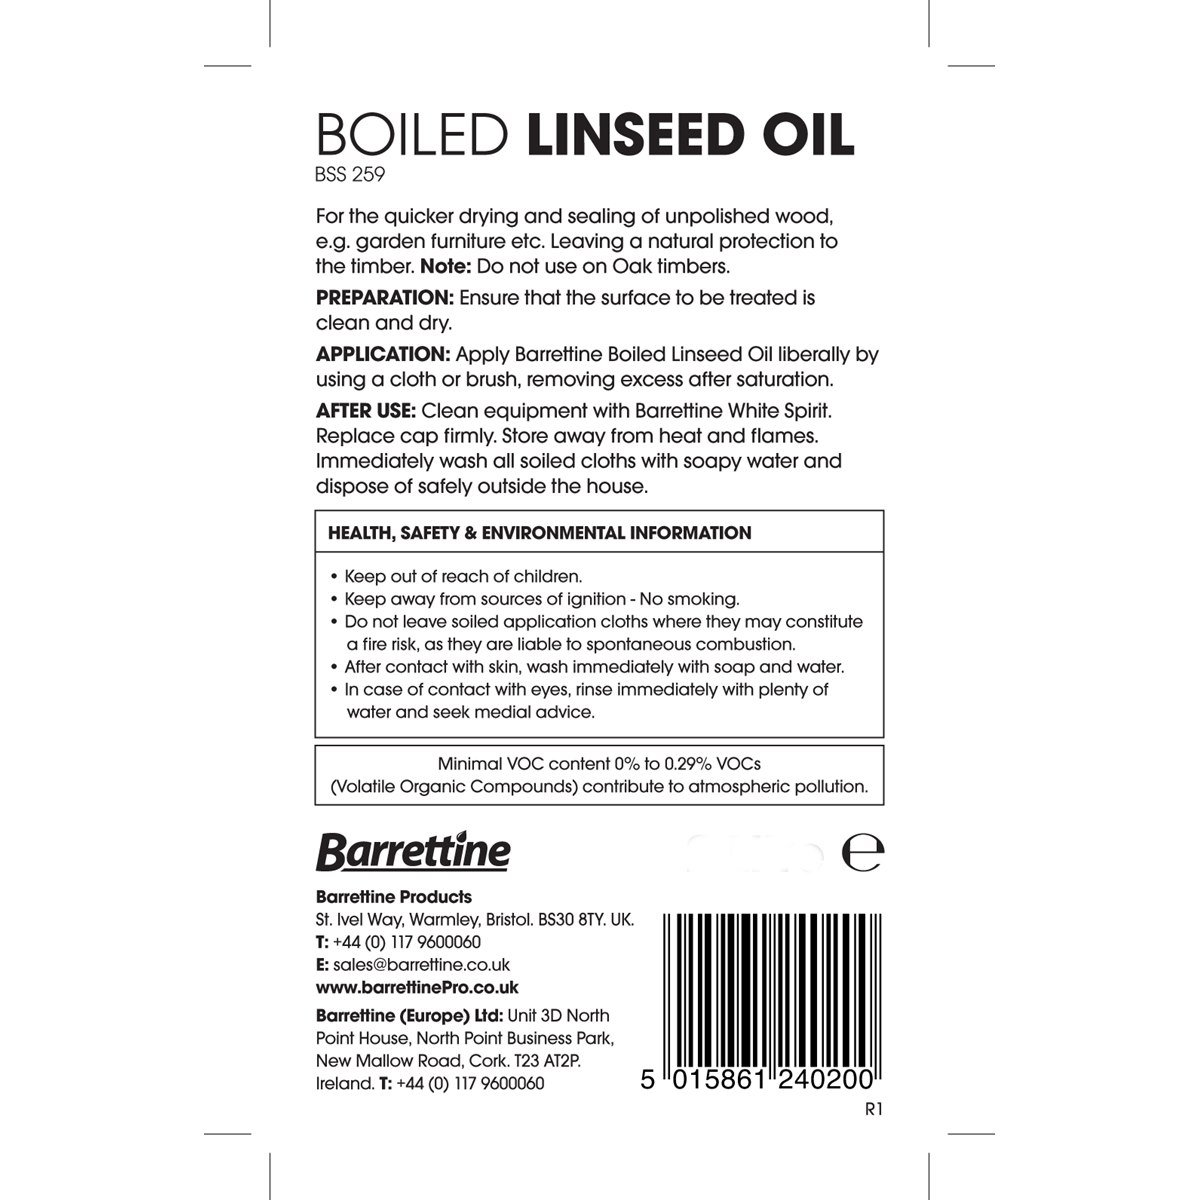 Barrettine Boiled Linseed Oil Usage Instructions